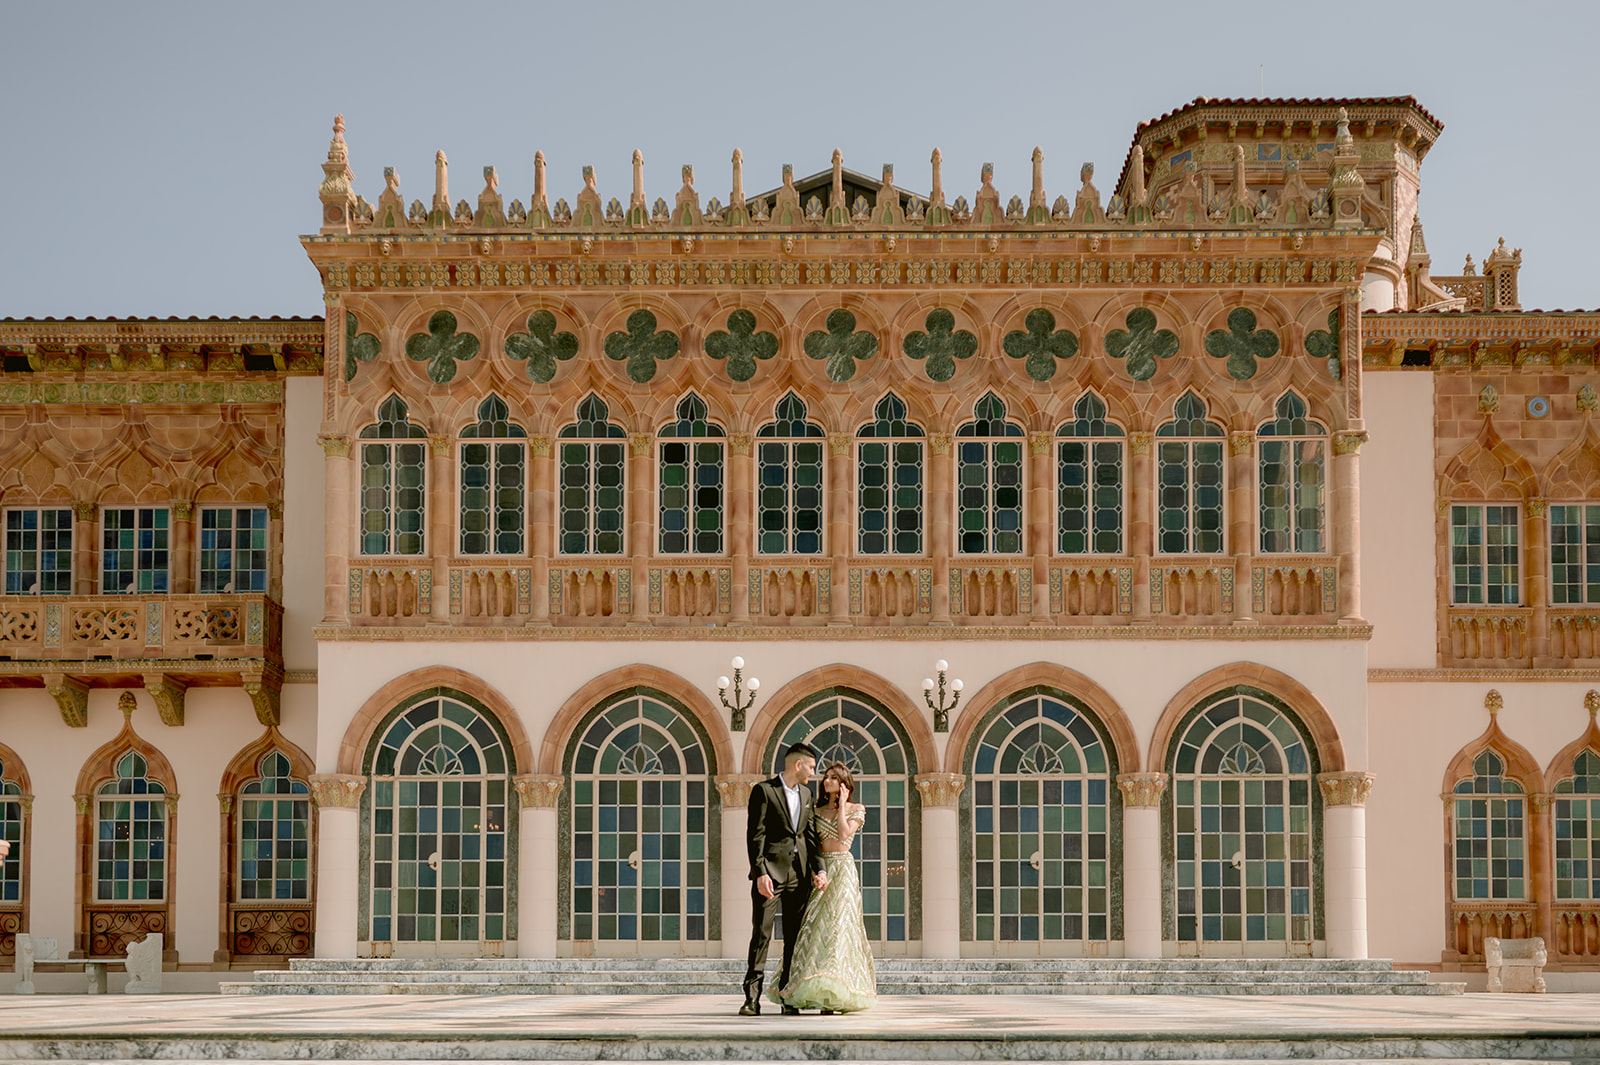 "Stunning Ringling Museum engagement session with beautiful Indian couple in traditional attire"
